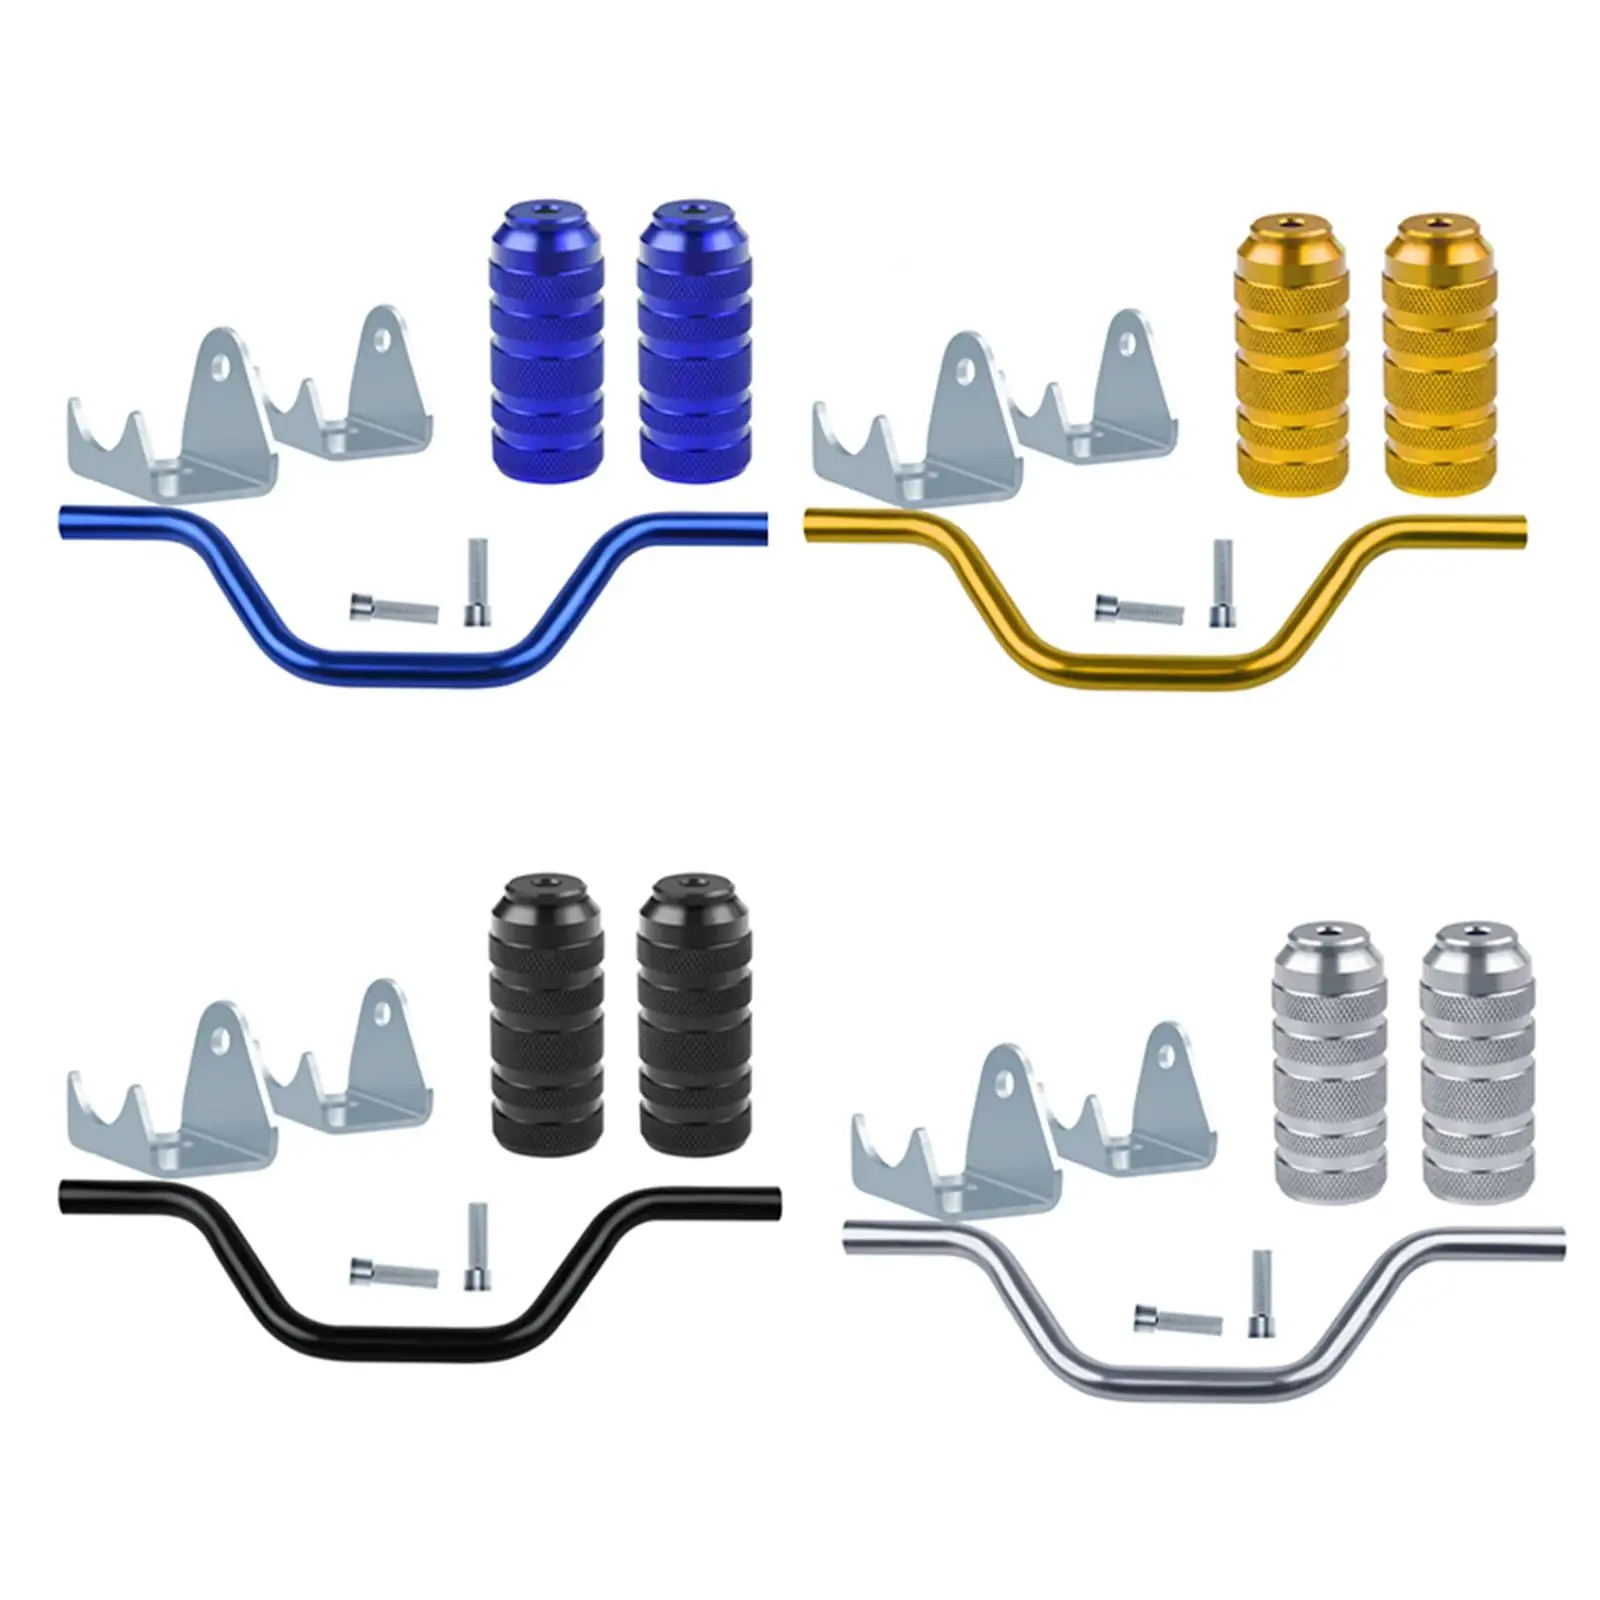 Universal Motorcycle Foot Pegs Pedals Parts CNC Foot Rests Fit for ATV Dirt Bike